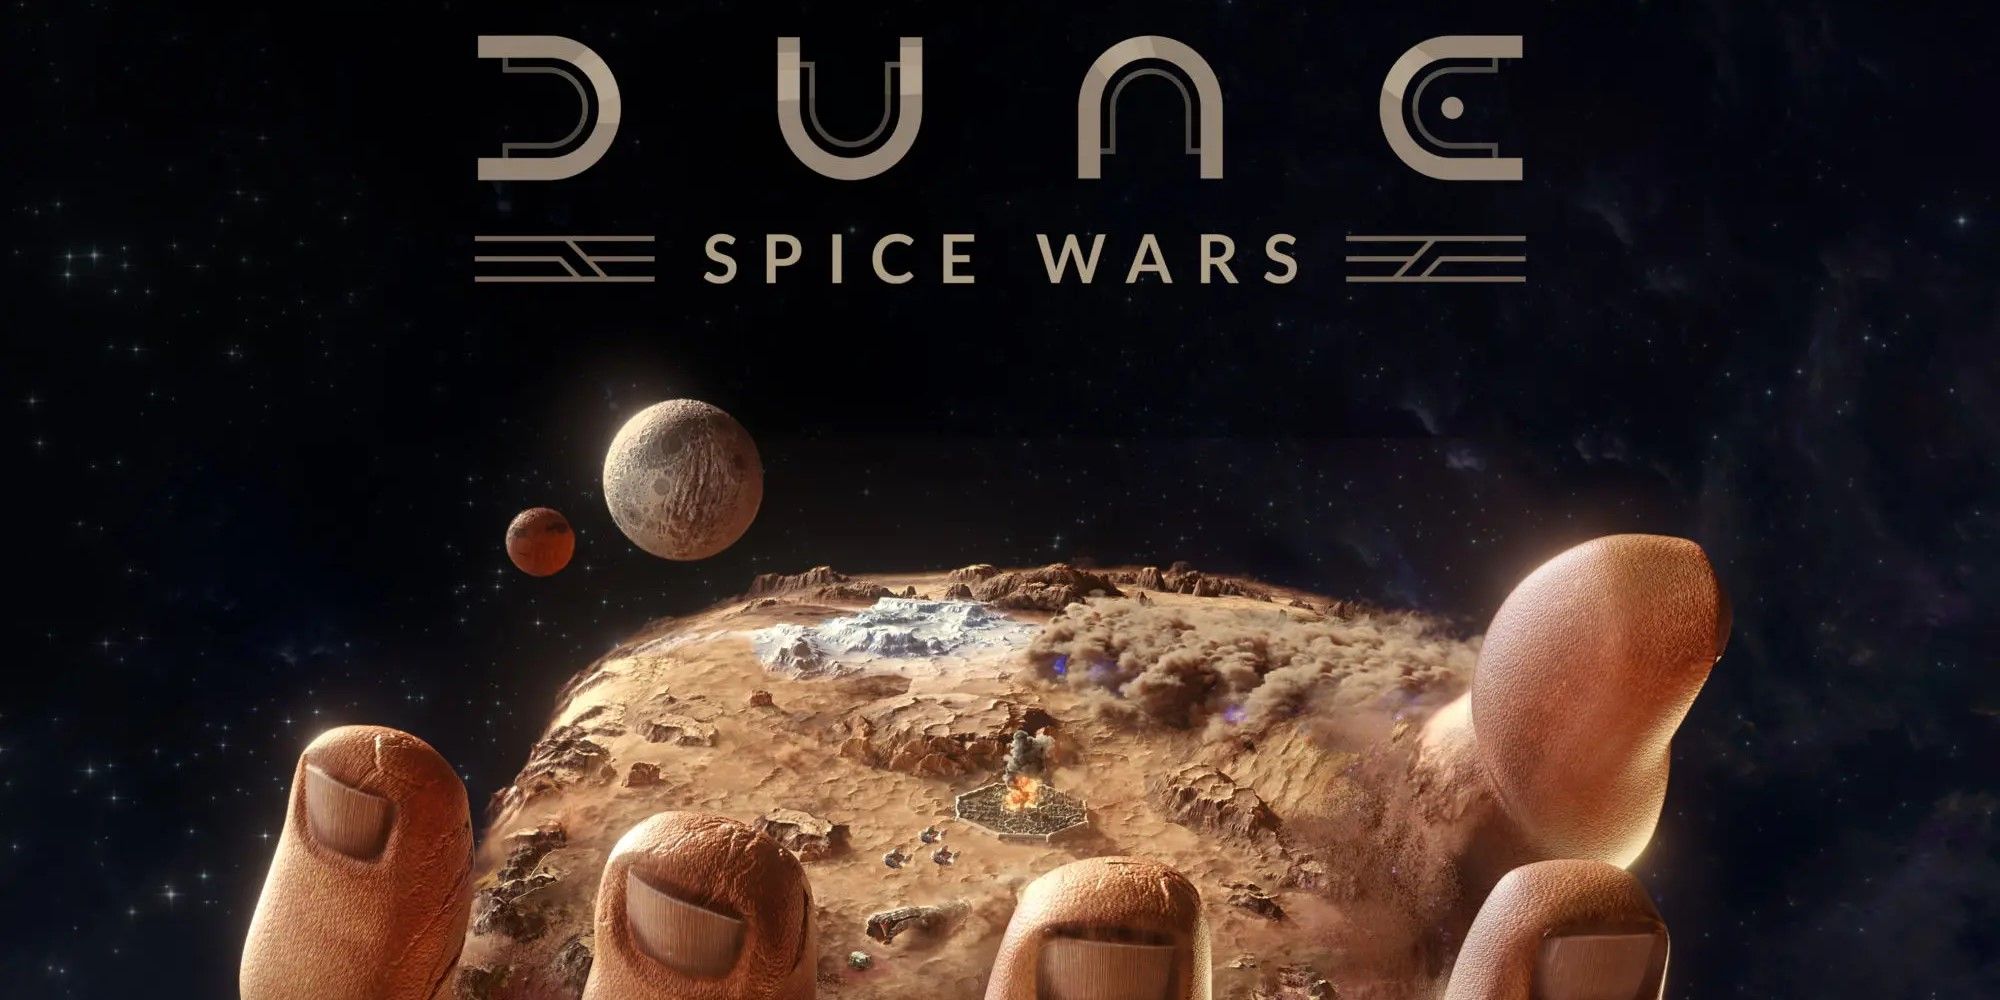 The title art for Dune: Spice Wars.